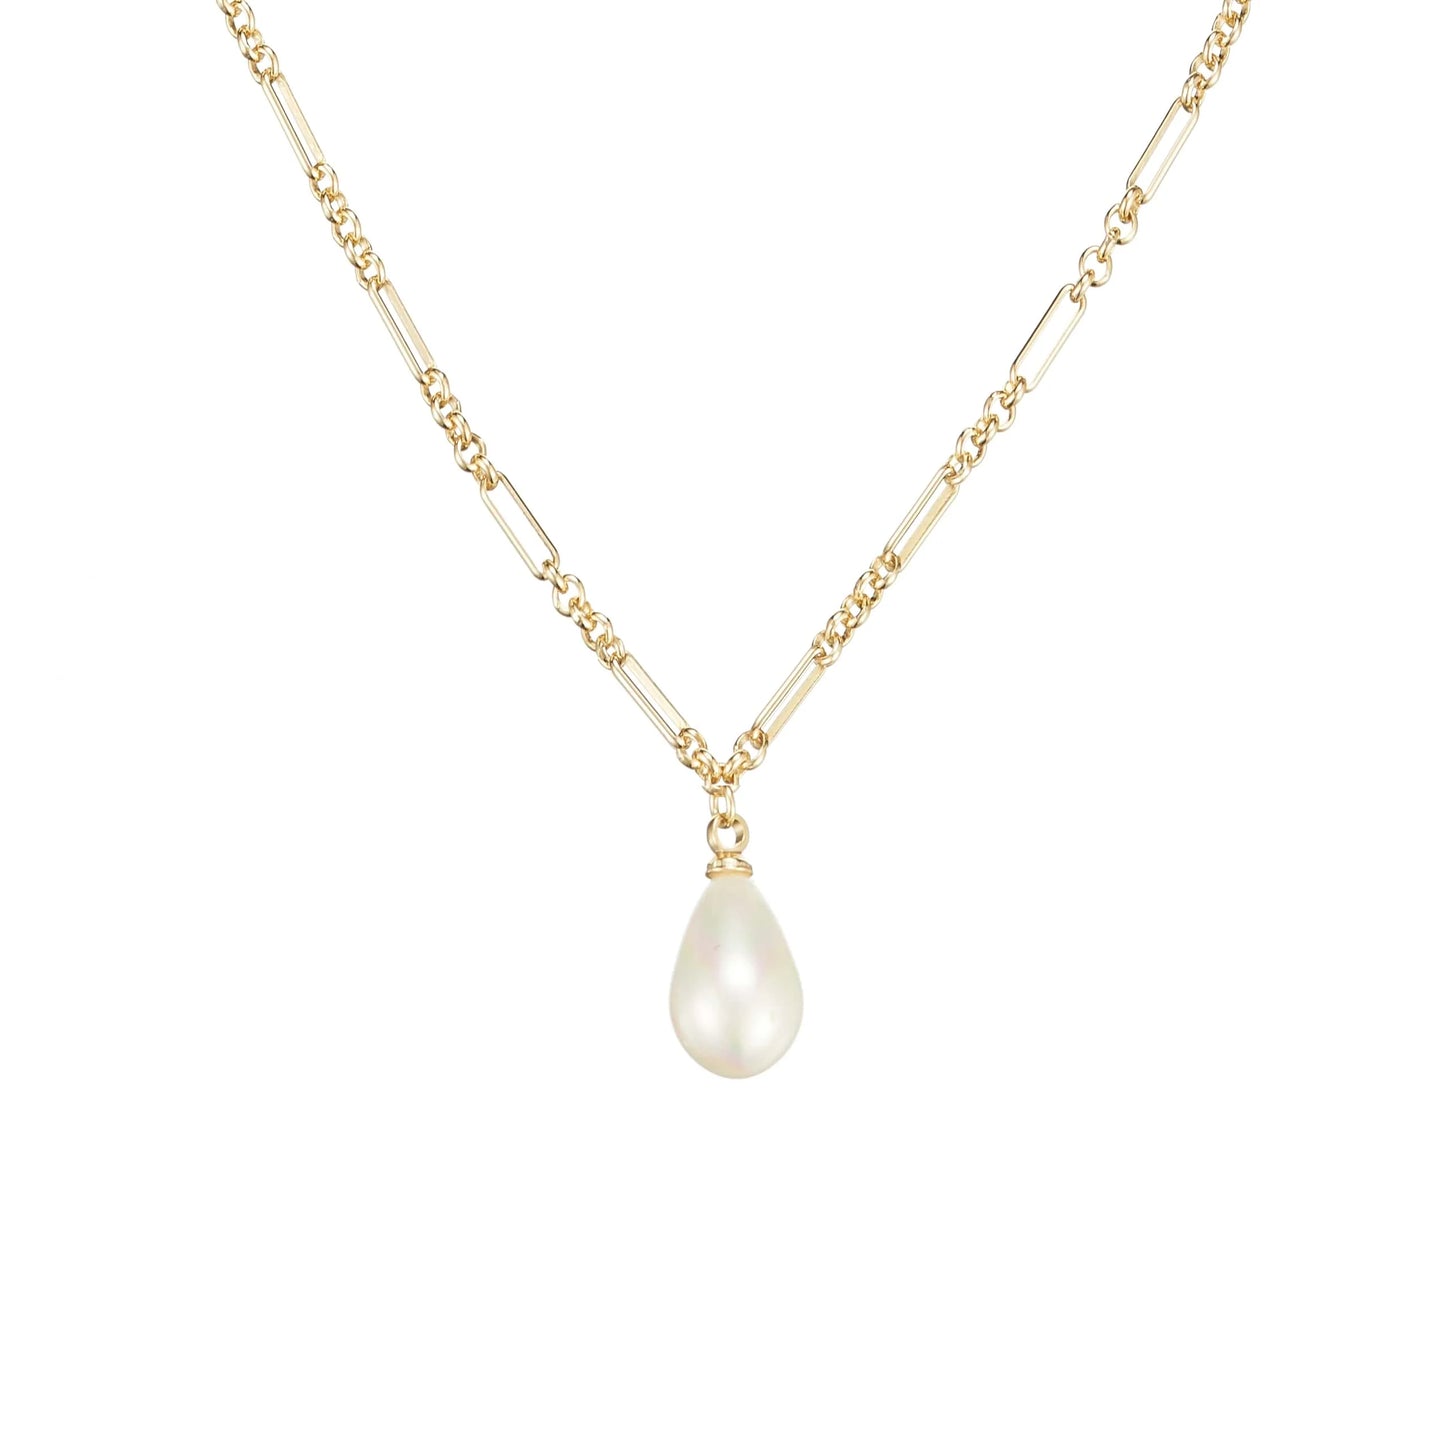 Natalie Wood- Adorned Pearl Drop Necklace in Gold